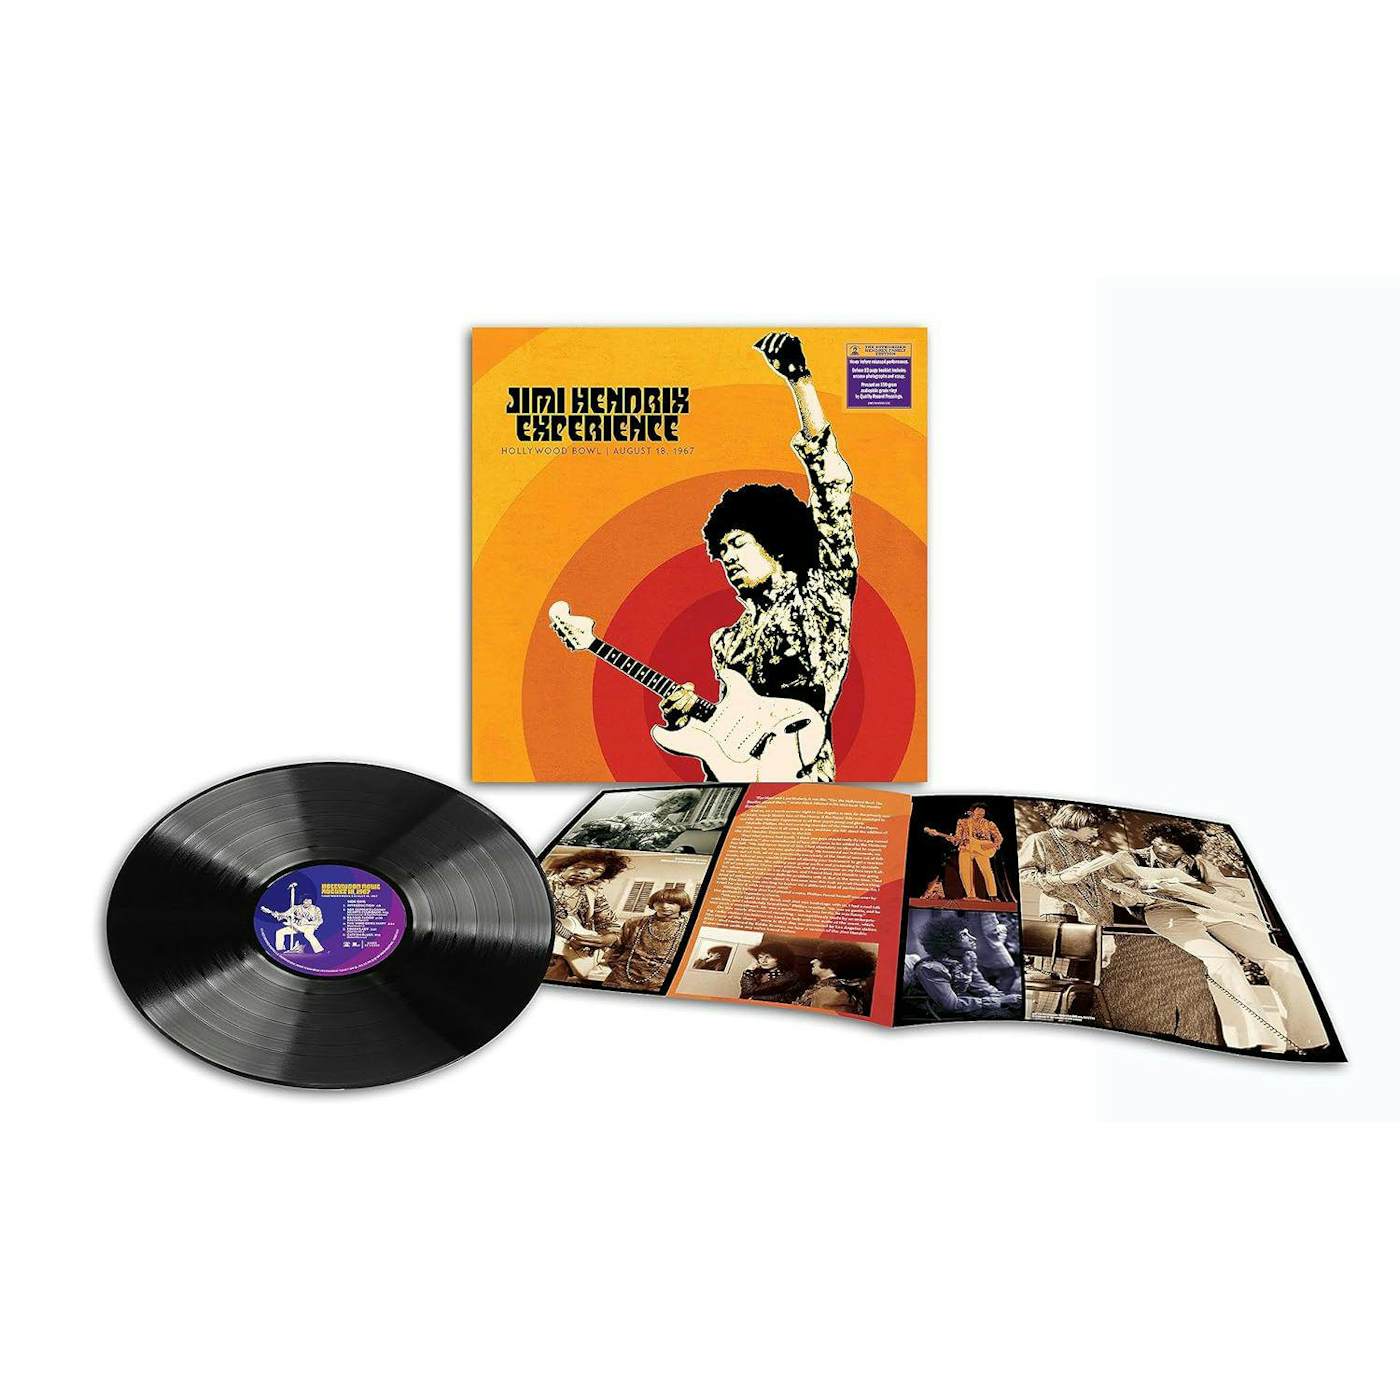 JIMI HENDRIX EXPERIENCE: LIVE AT THE HOLLYWOOD BOWL: AUGUST 18, 1967 Vinyl Record